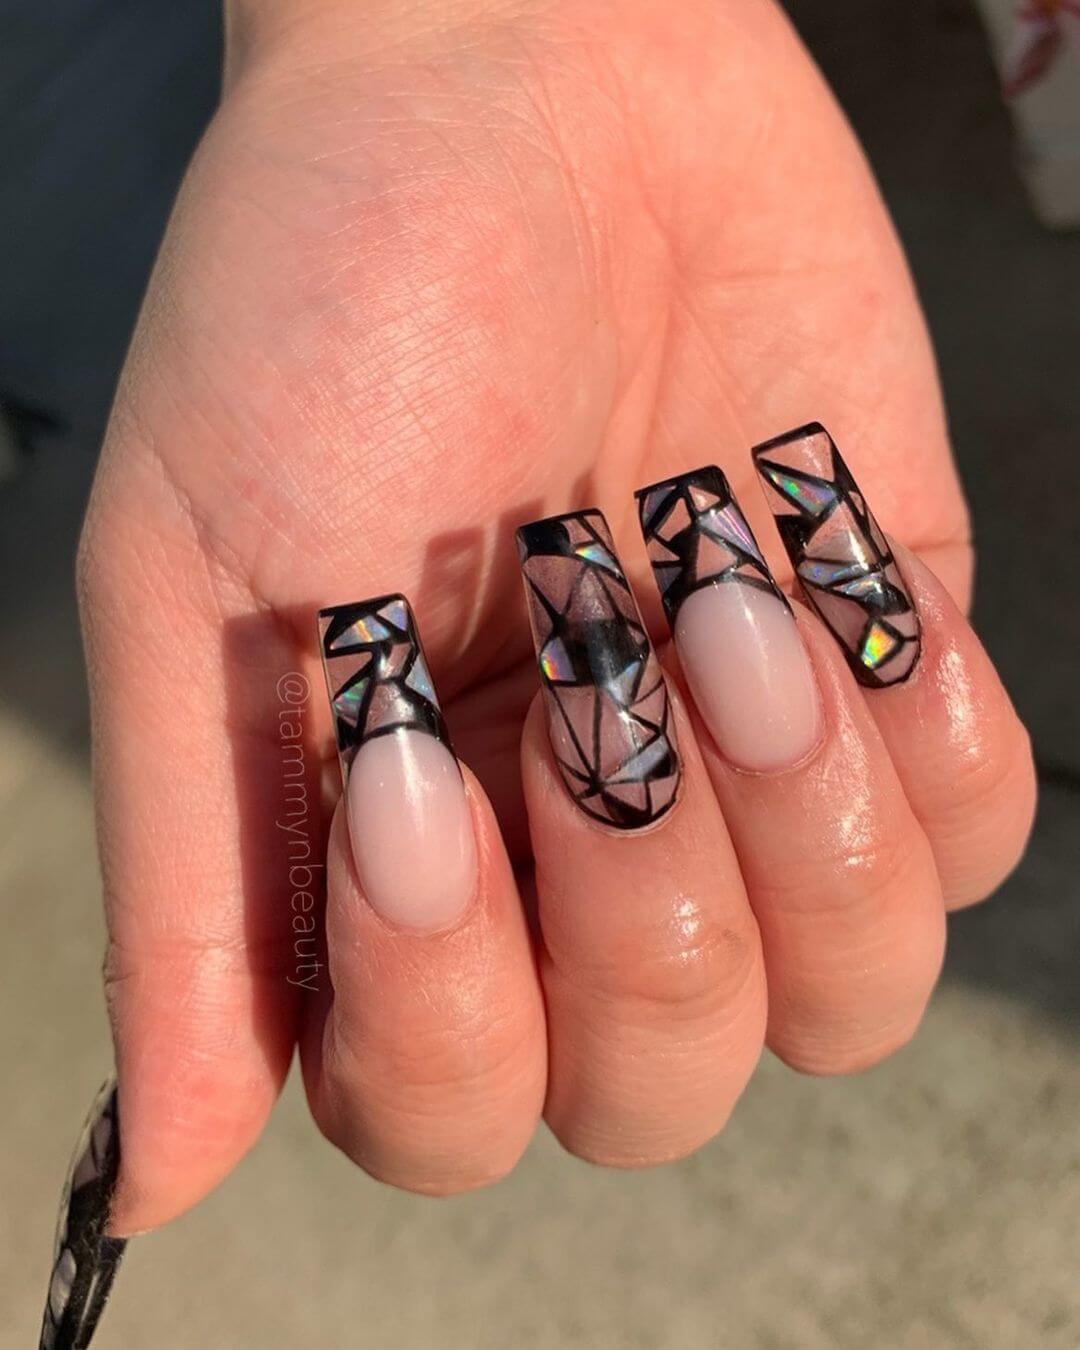 This glossy stained nailart is very impressive